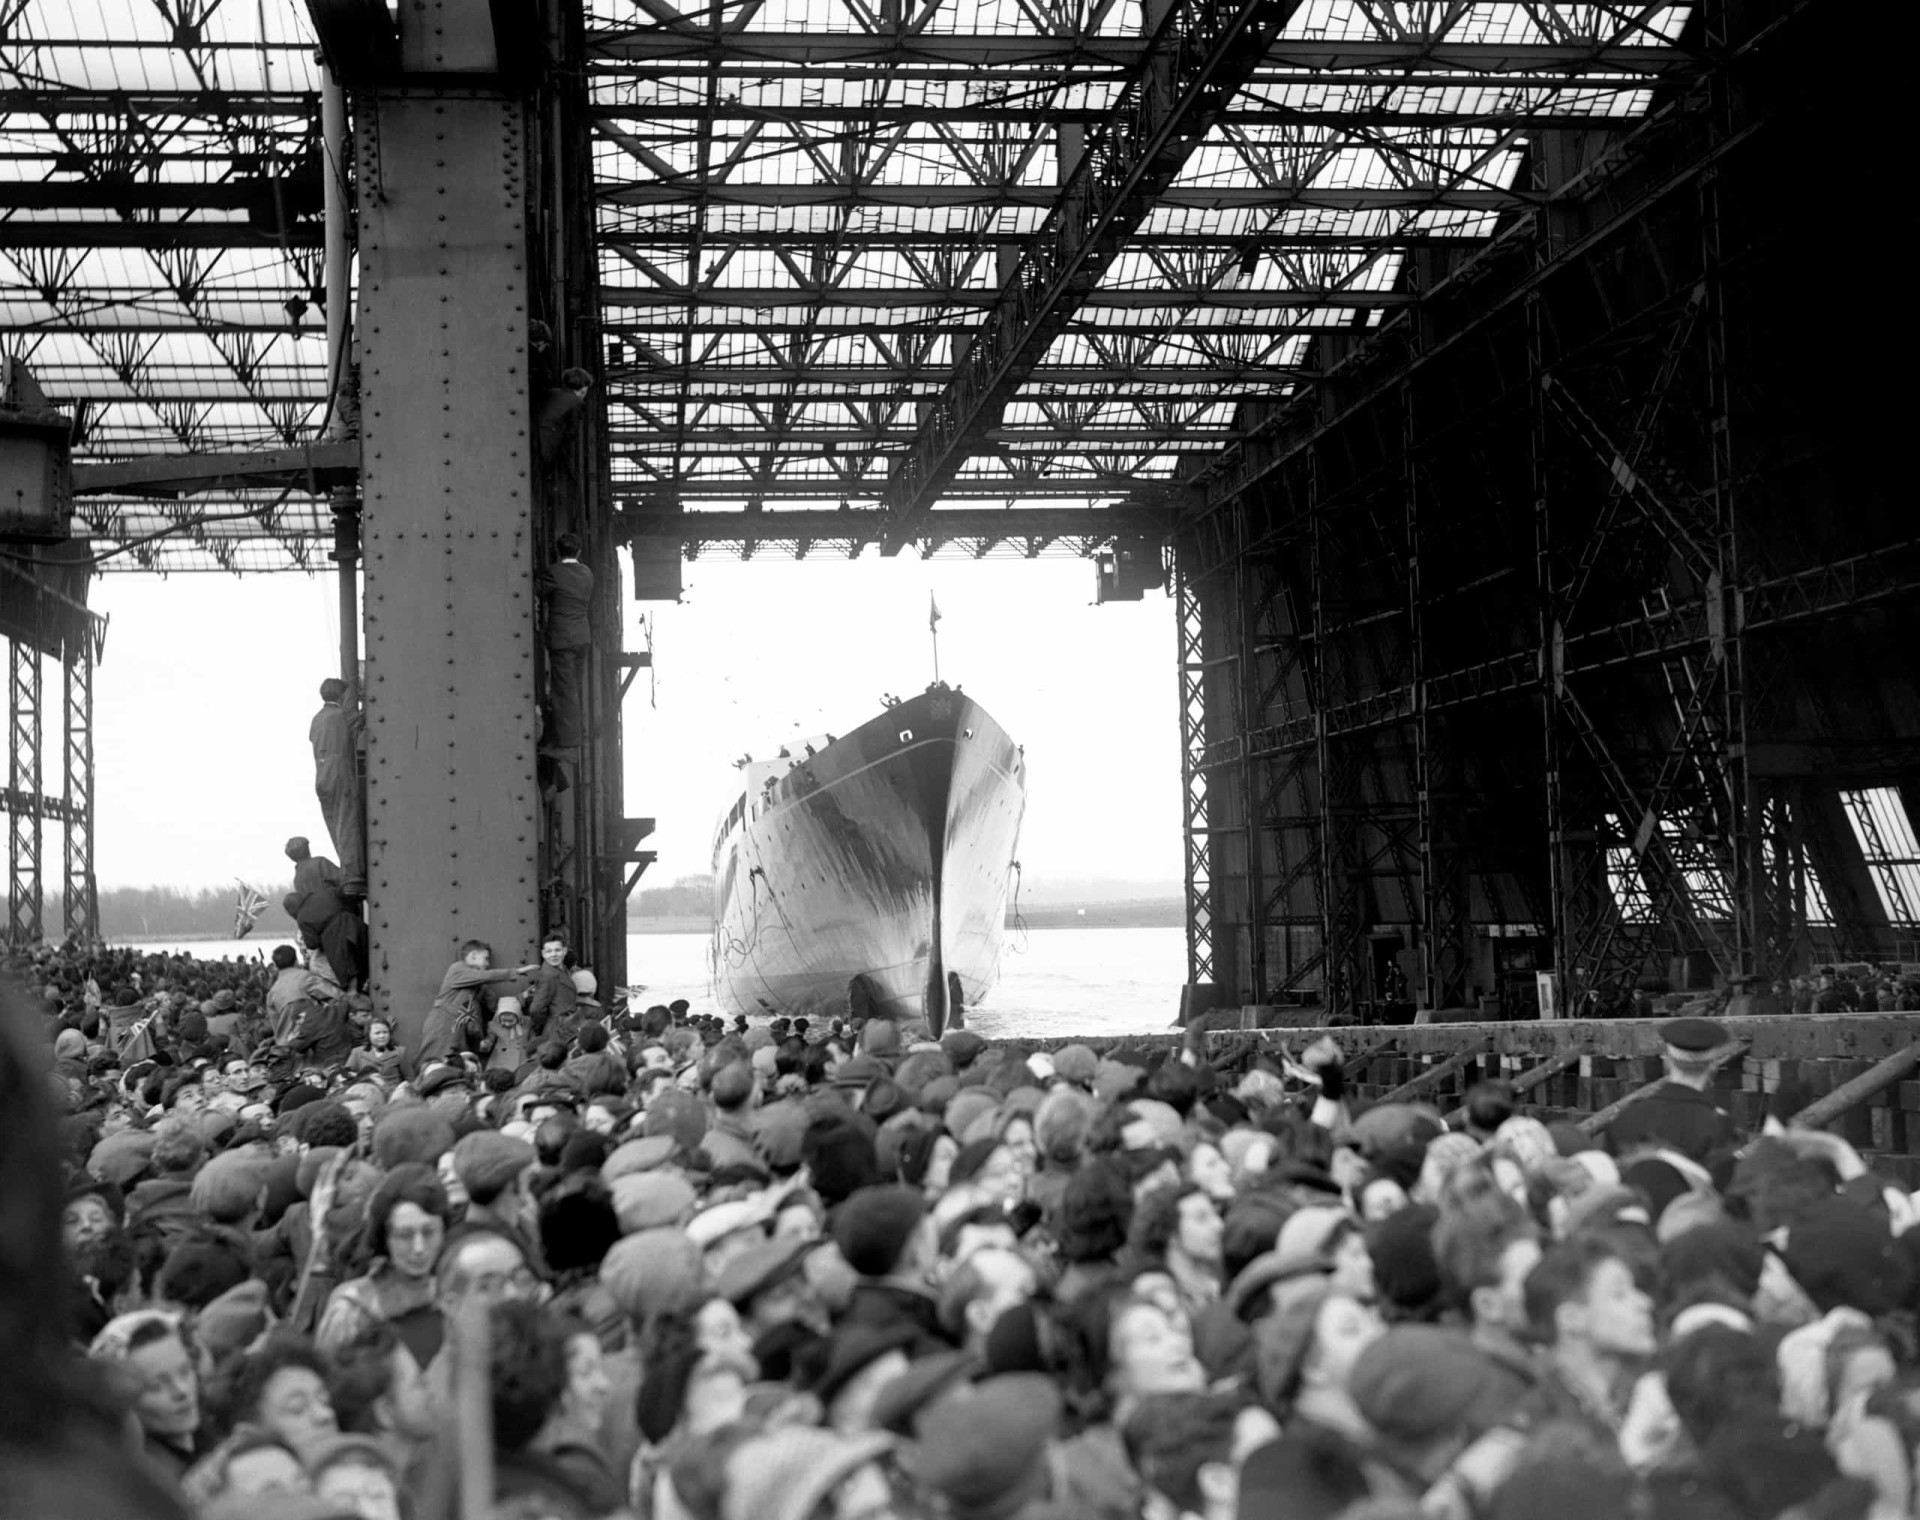 <p>The new Royal Yacht <em>Britannia</em> enters the water after her launch on April 16, 1953 by Queen Elizabeth II at John Brown's shipyard on Clydebank, Scotland. The 126-m (413-ft) <em>Britannia</em> was designed with three masts and could reach a seagoing cruising speed of 21 knots.</p><p>You may also like:<a href="https://www.starsinsider.com/n/179932?utm_source=msn.com&utm_medium=display&utm_campaign=referral_description&utm_content=474709v1en-us"> Do you recognize these big TV stars from 10 years ago?</a></p>